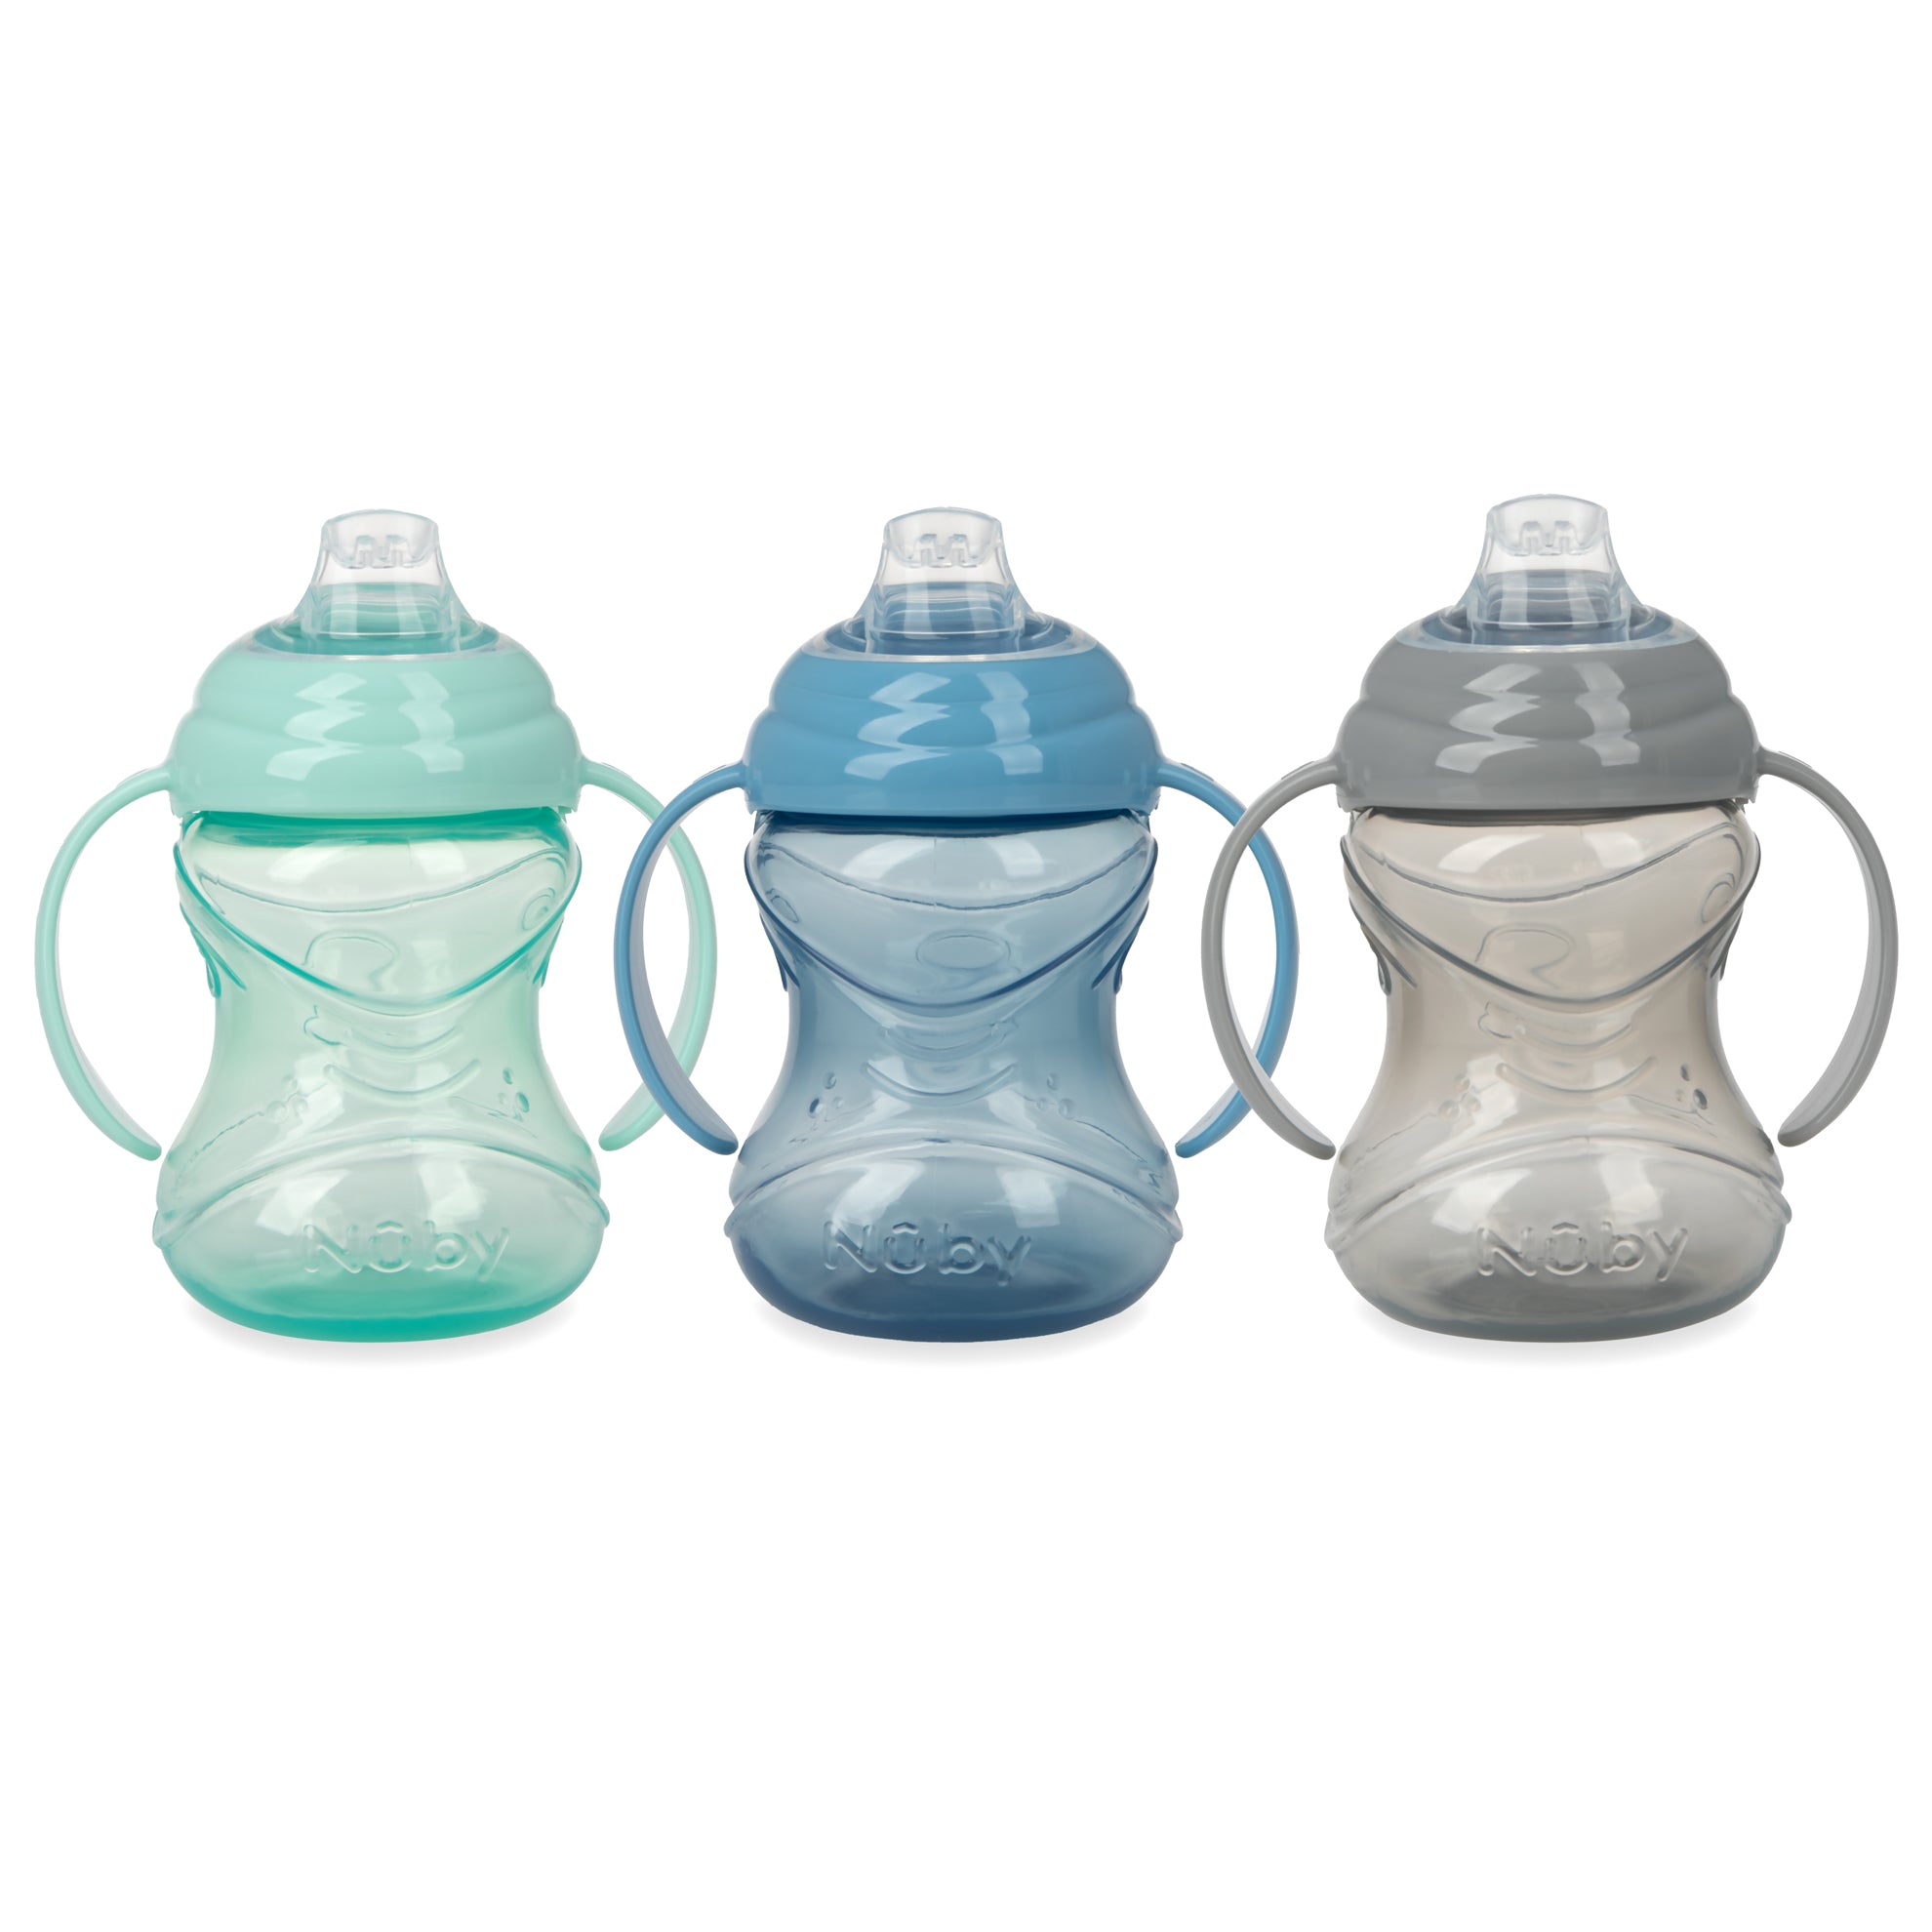 Sippy Cup, Bpa Free Baby & Toddler Cups W.handles, Non Spill Cup,  Dishwasher Safe Baby Cup, 6+ Months -240ml, 2 Pack, Blue/green